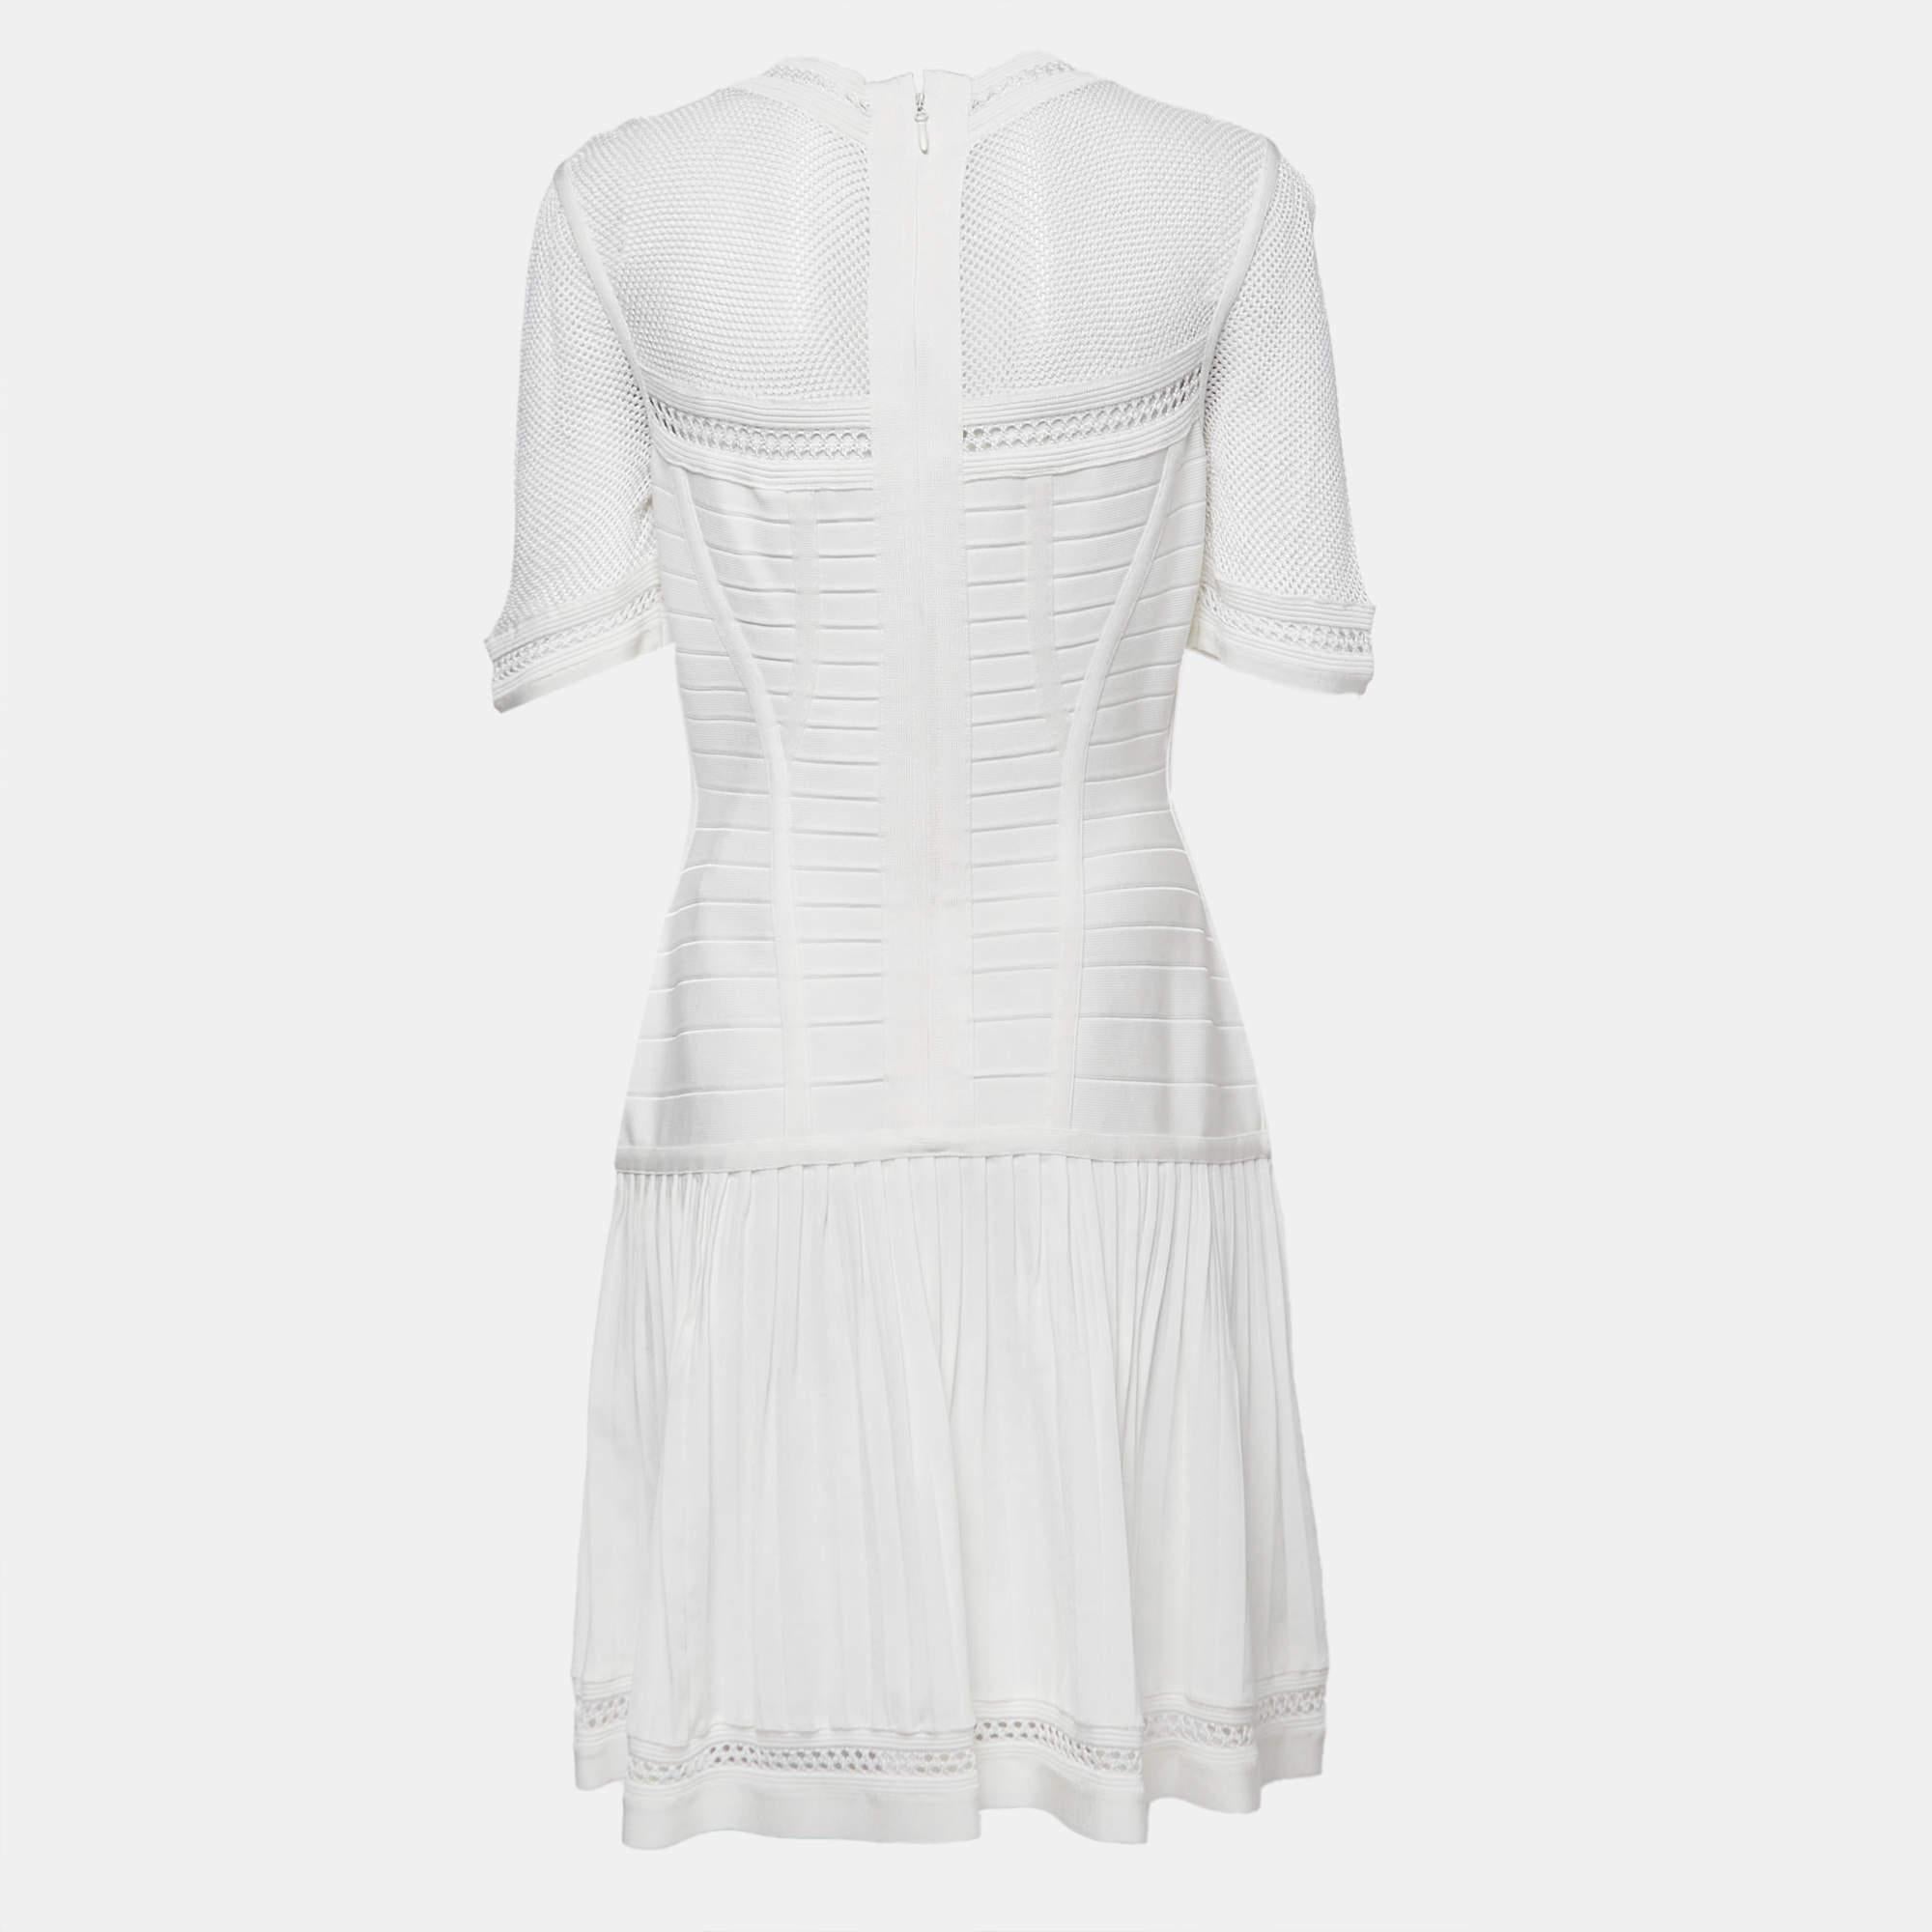 The Herve Leger dress exudes sophistication and allure. Crafted from premium fabric, it clings to the body's curves flawlessly, highlighting feminine silhouettes. The sleeve design and flattering length add a touch of elegance, making it a timeless